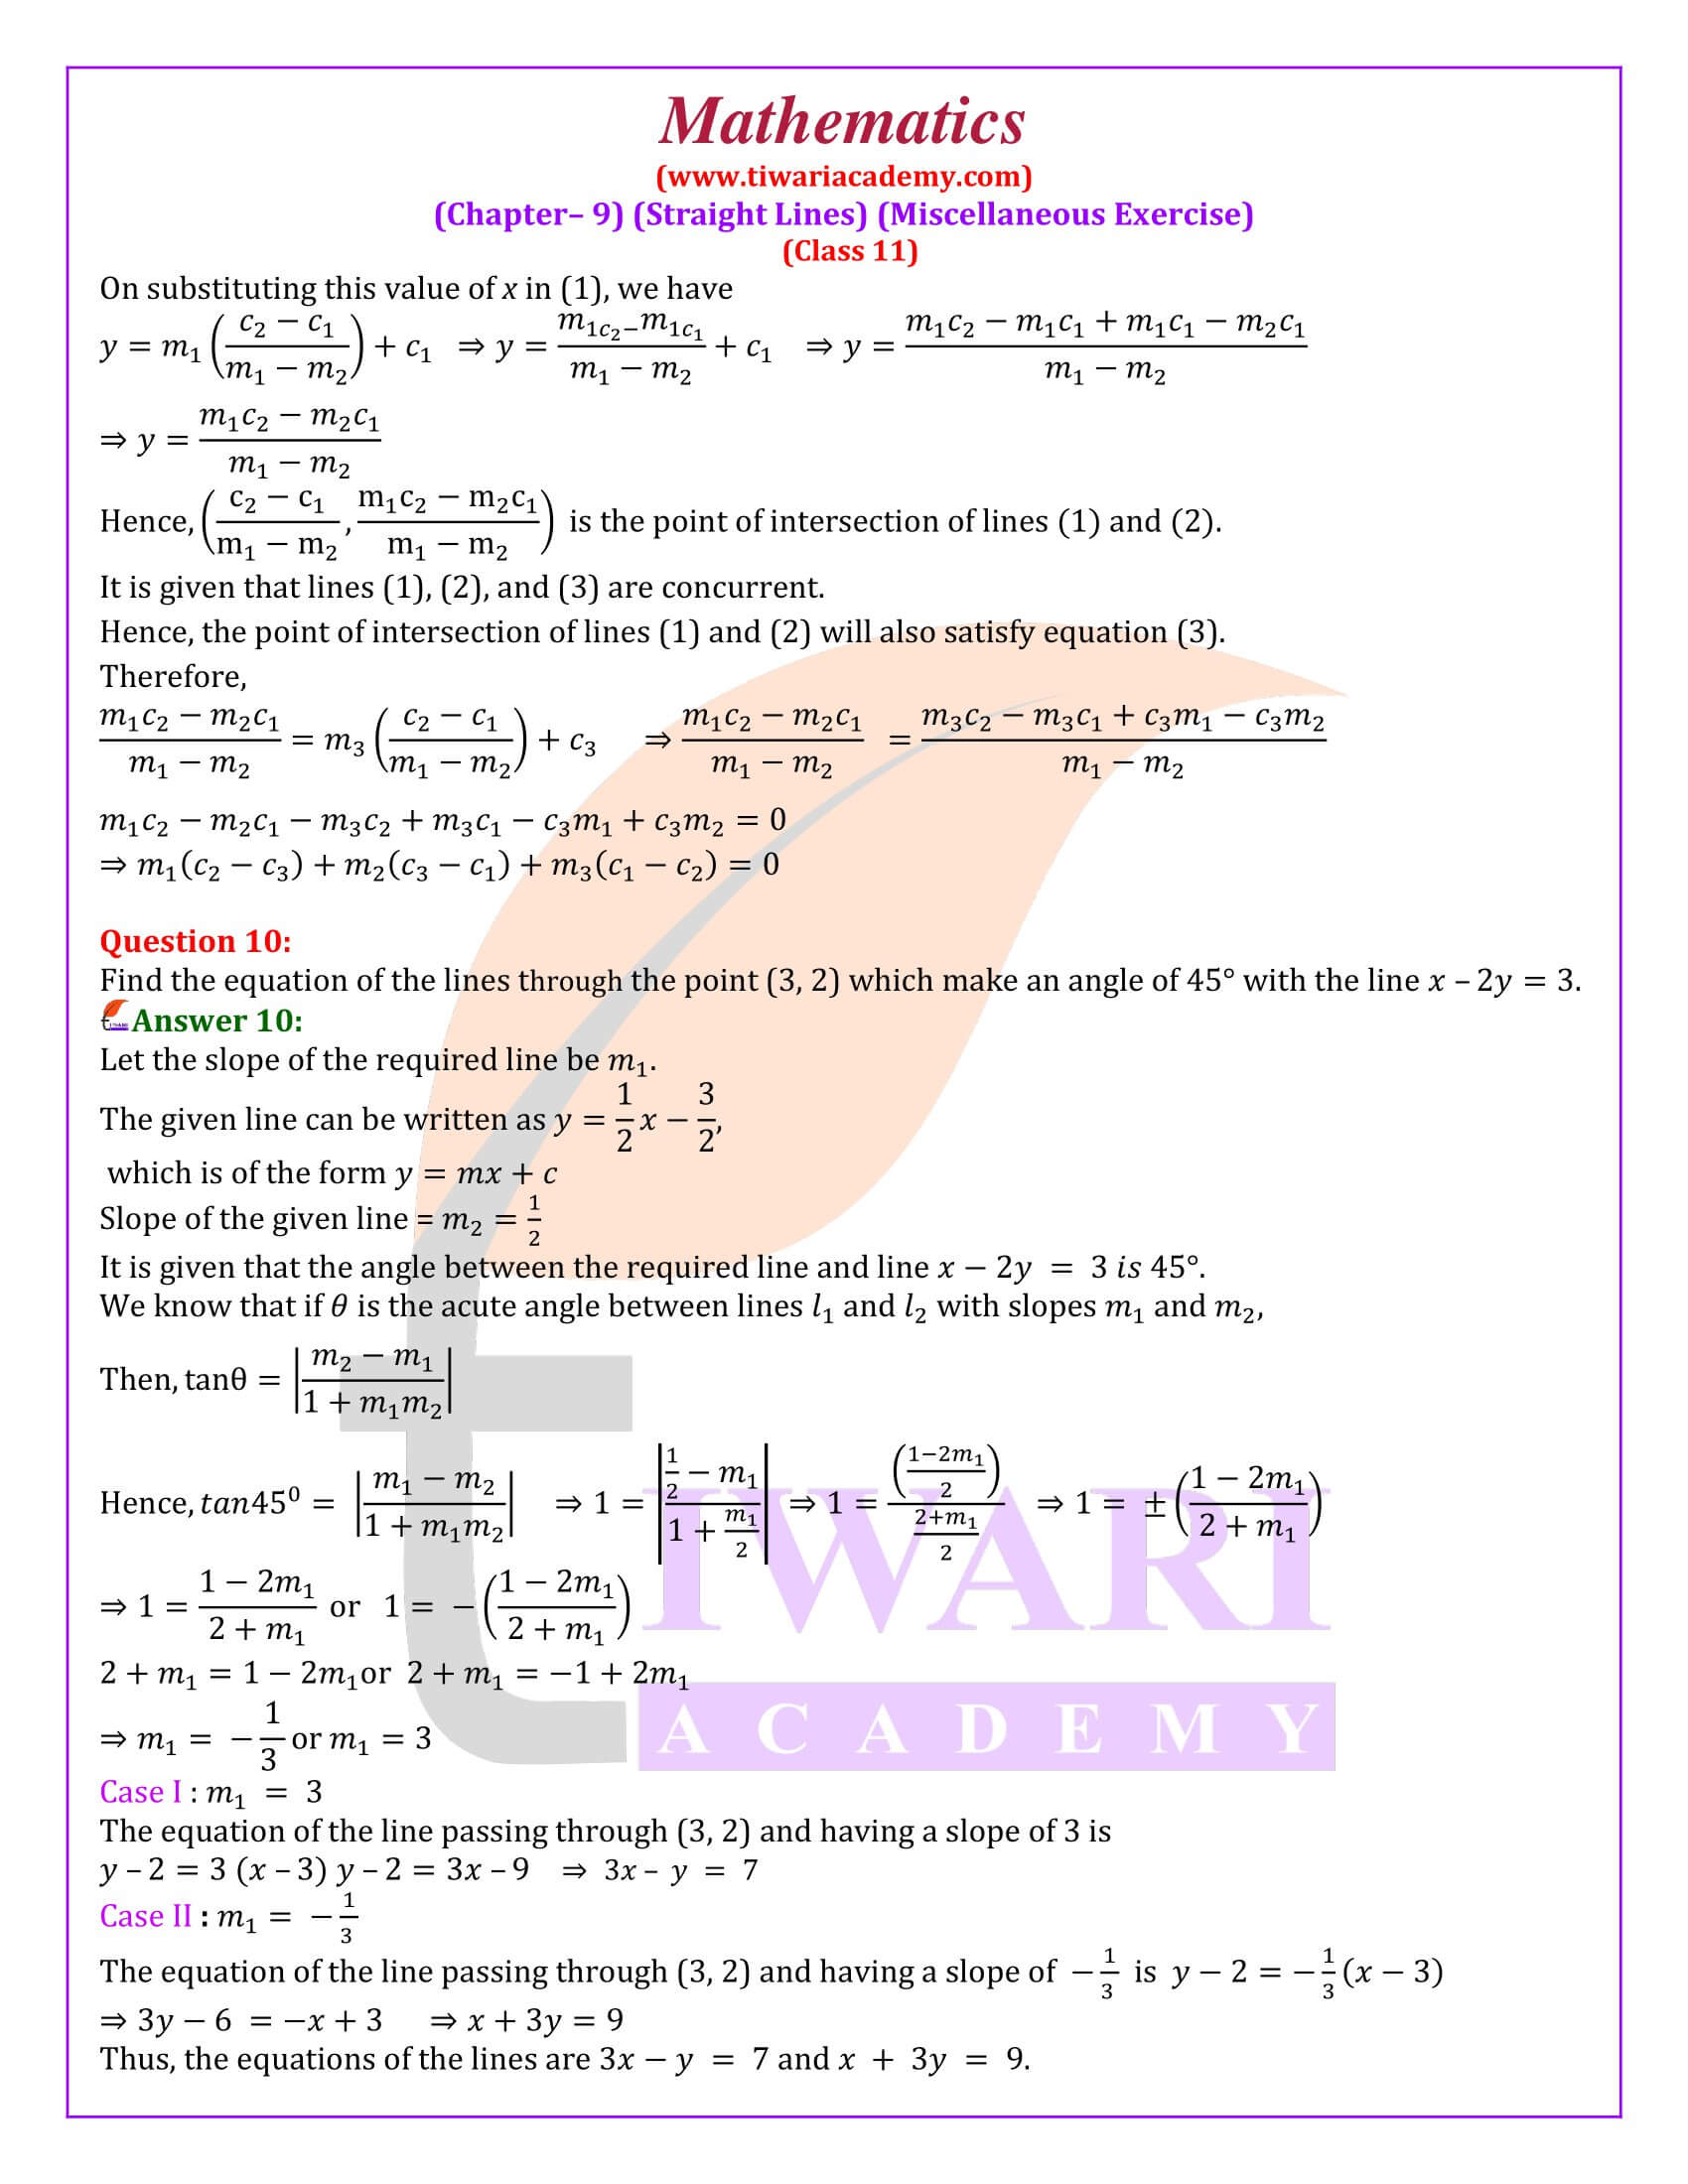 NCERT Solutions Class 11 Maths Chapter 9 Miscellaneous Exercise rationalised books